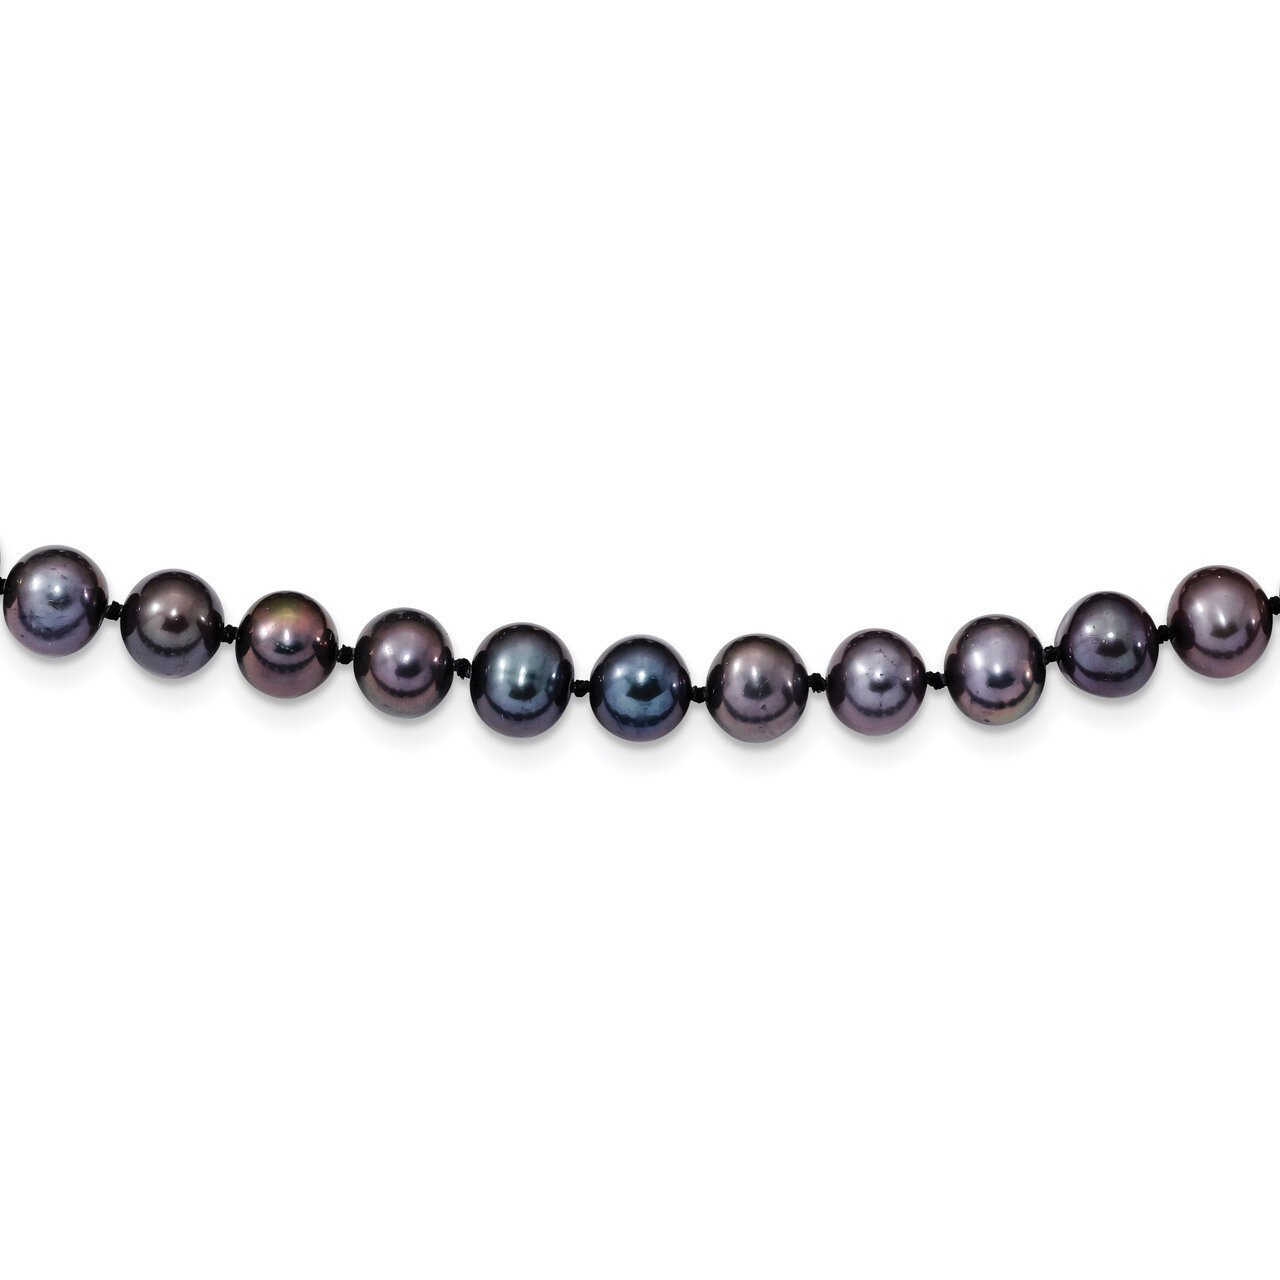 7-8mm Black Freshwater Cultured Pearl Necklace 18 Inch Sterling Silver Rhodium-plated QH5155-18